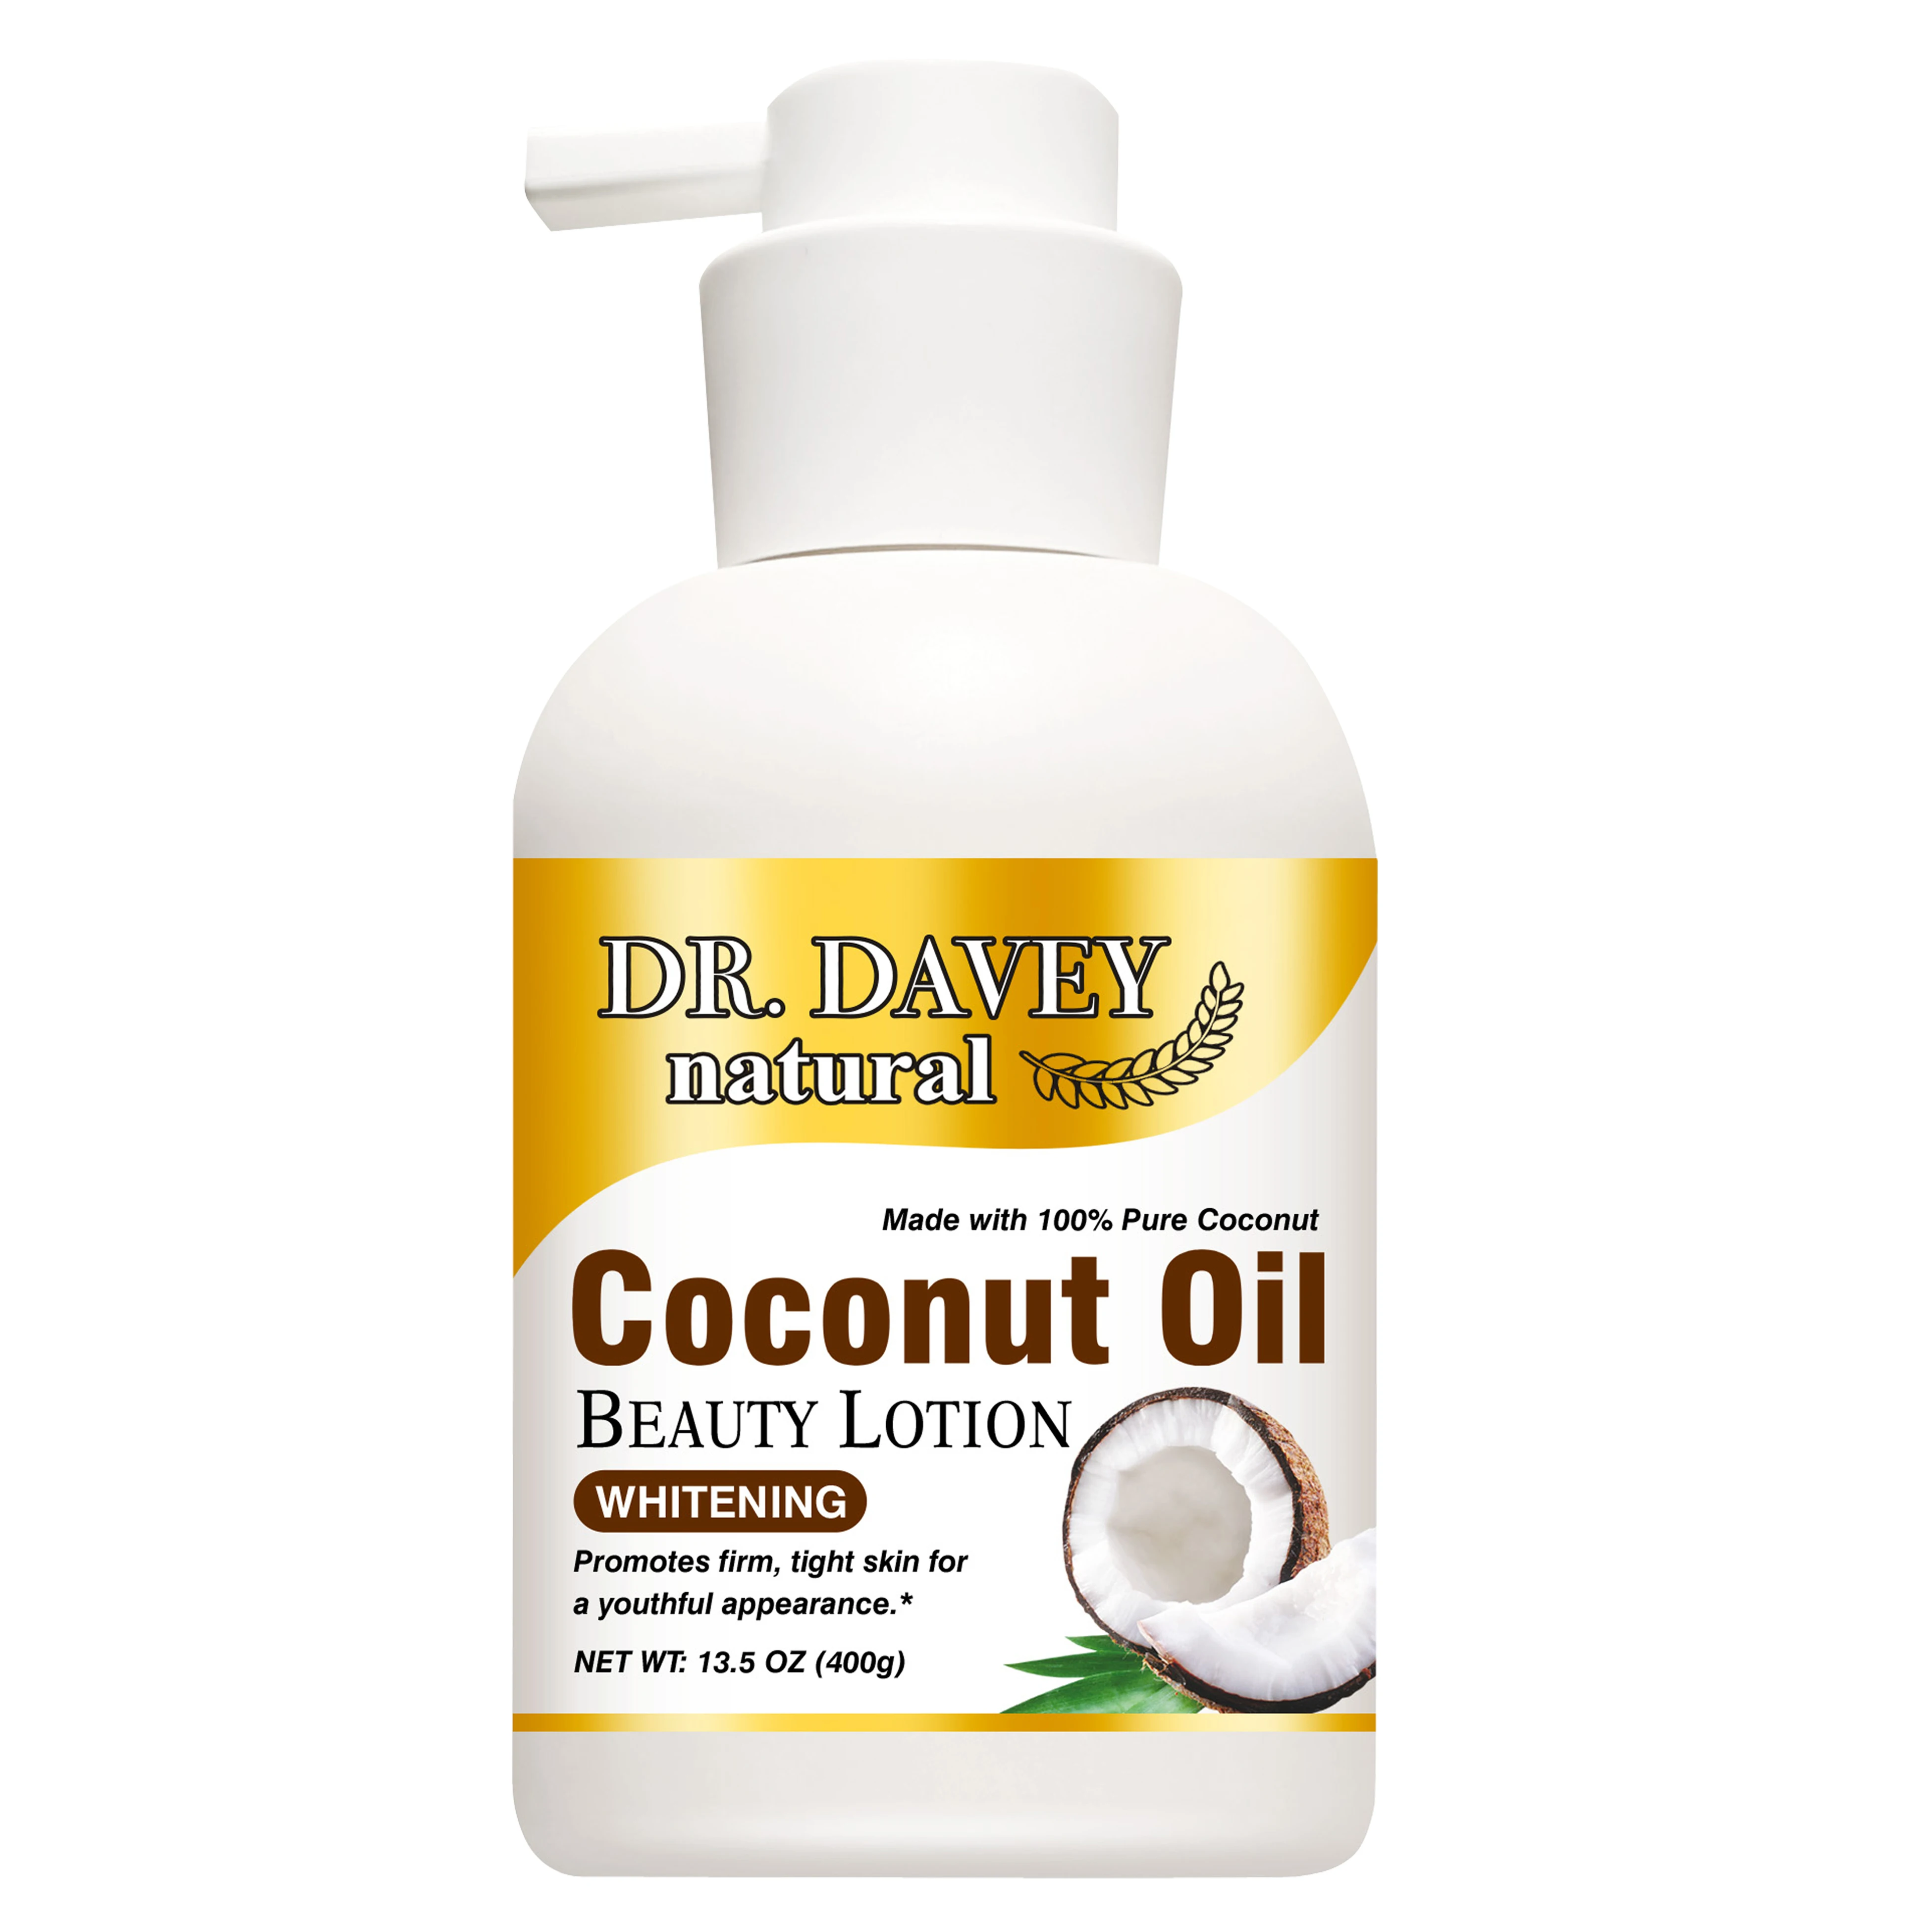 

DR. DAVEY Natural beauty whitening natural coconut pearl body lotion, Milk white